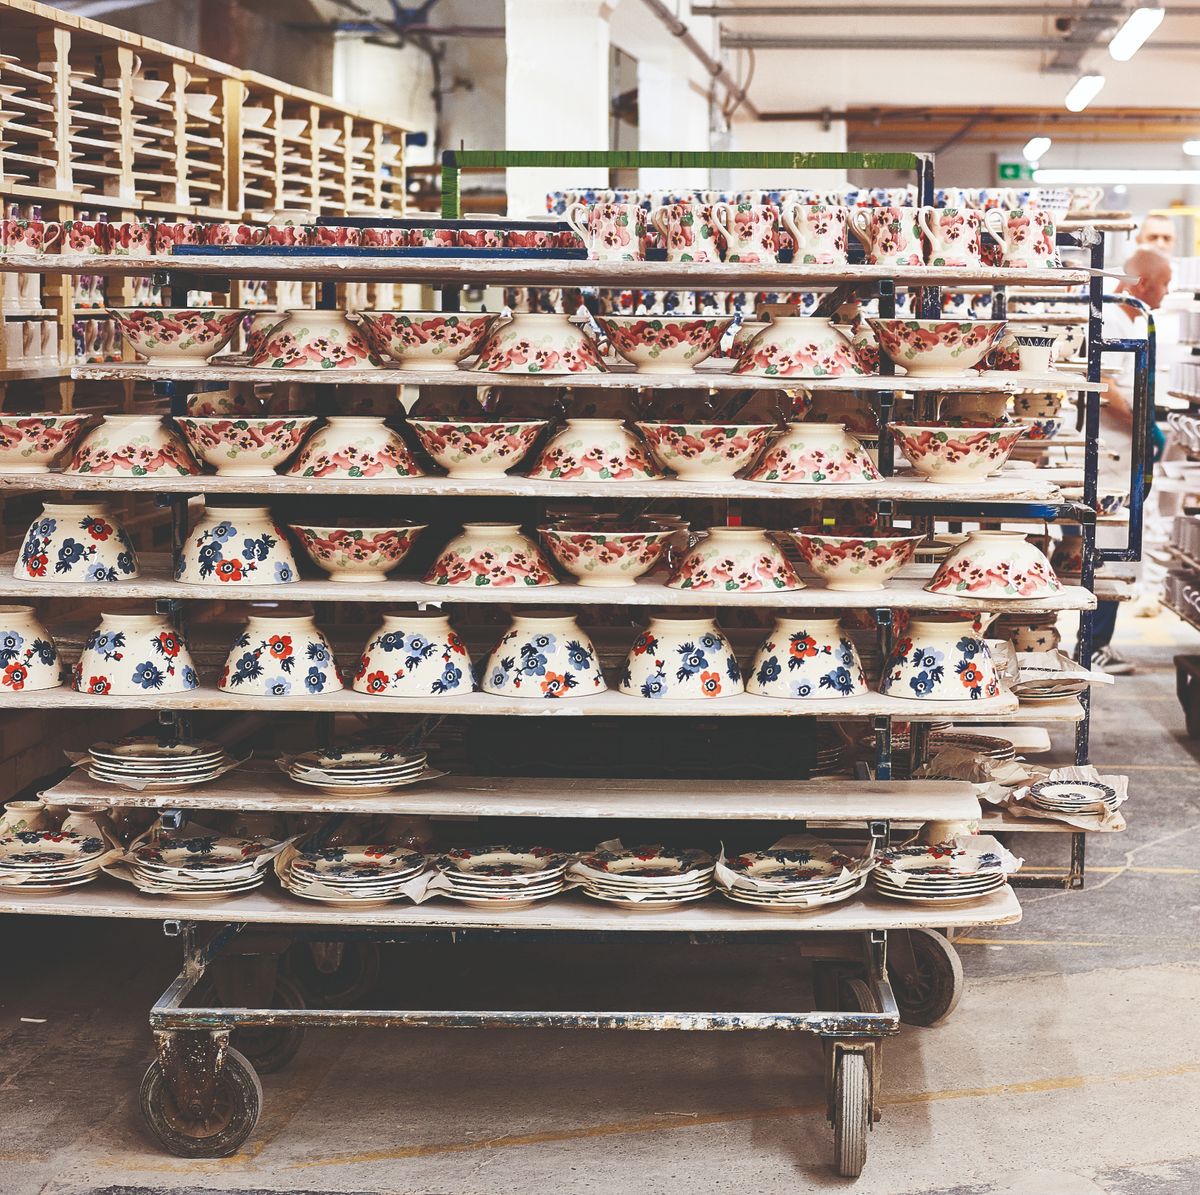 Emma Bridgewater Factory Day Trip, Decorating & Afternoon Tea Review